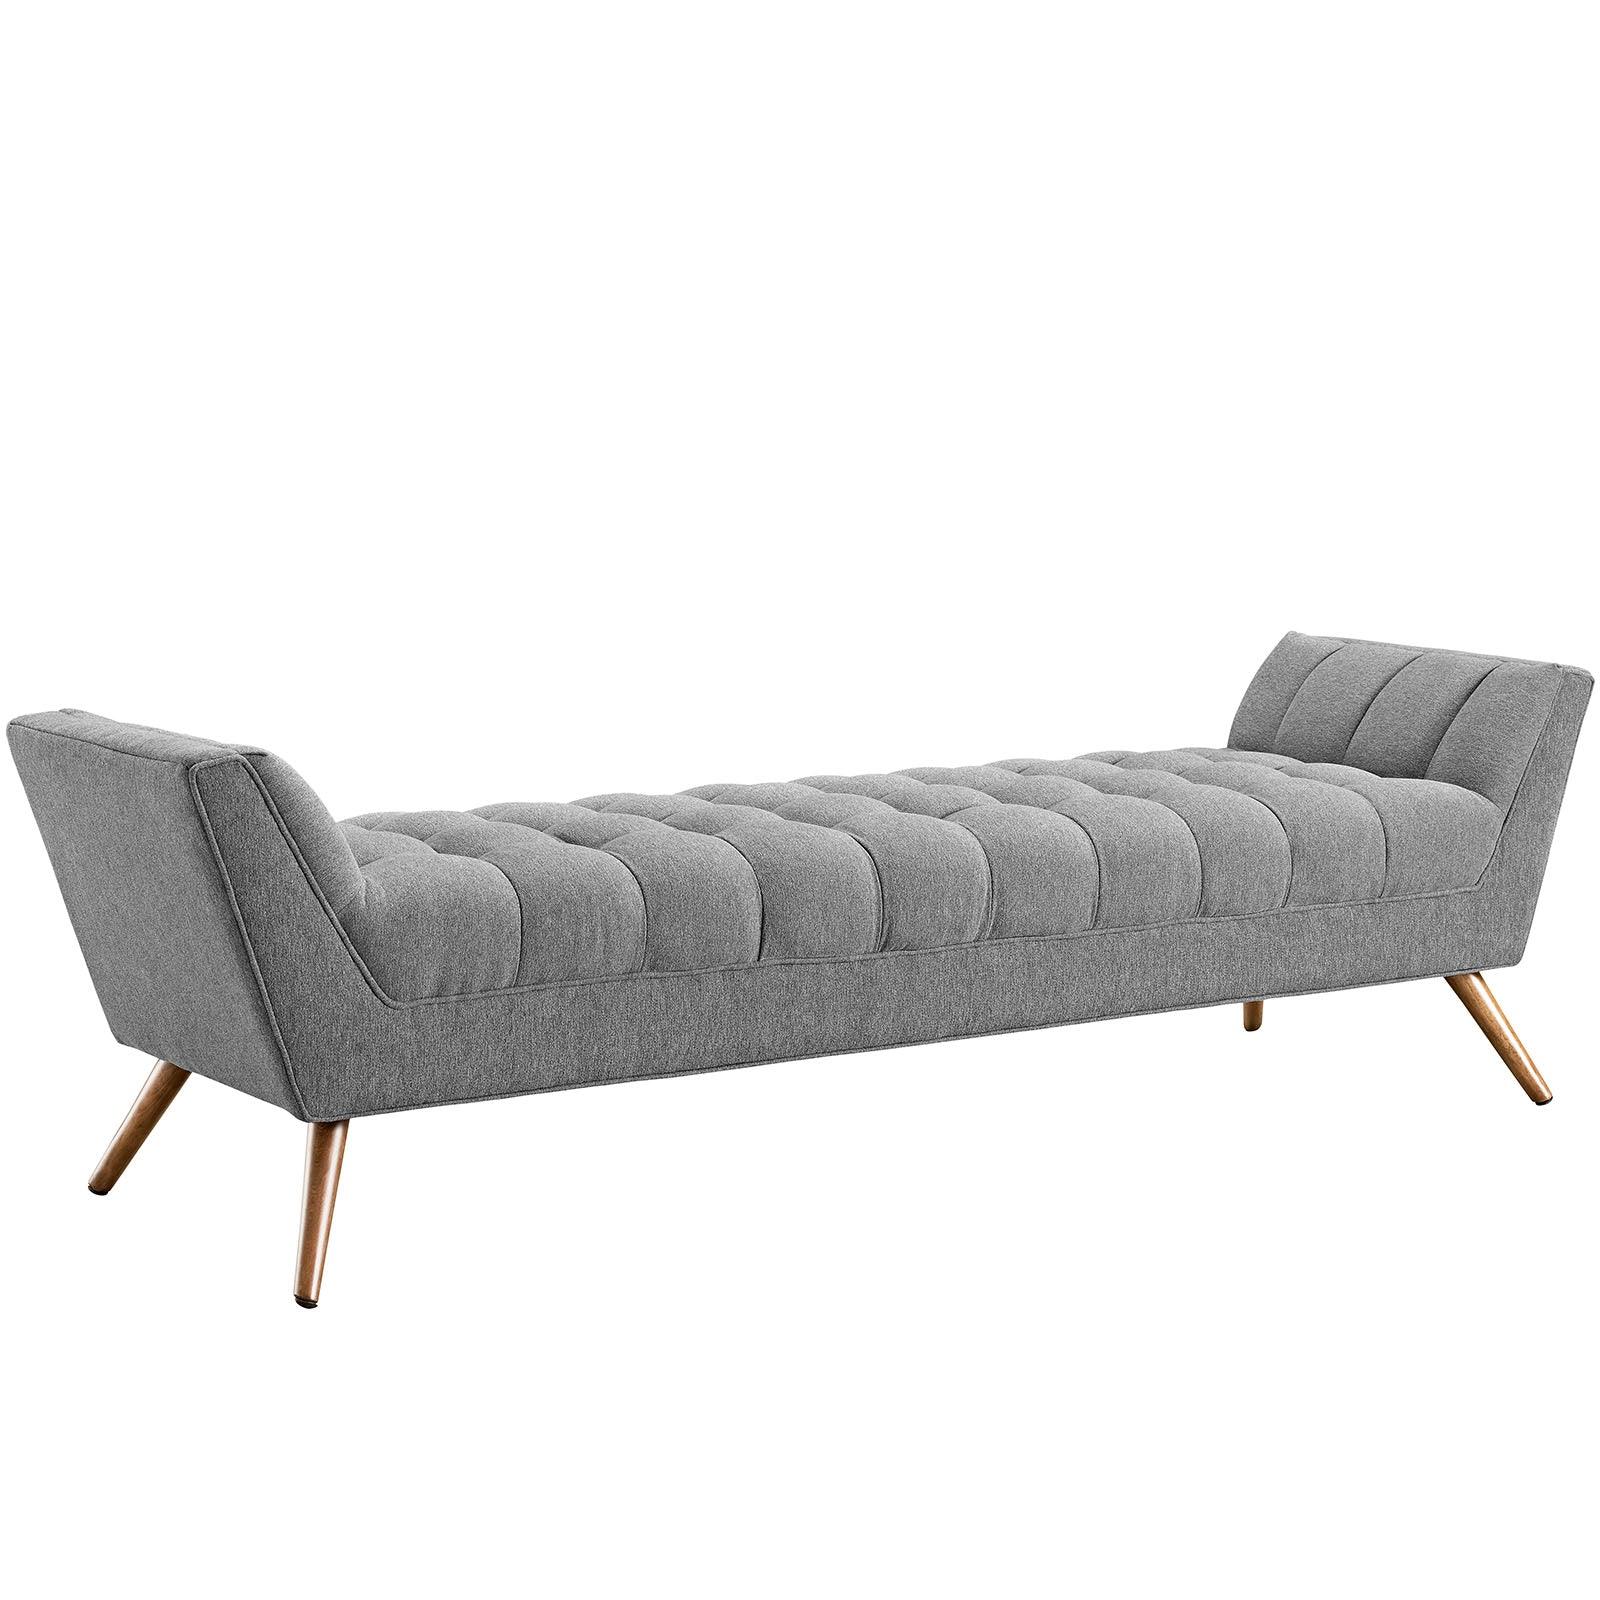 Modway Response Upholstered Fabric Bench FredCo